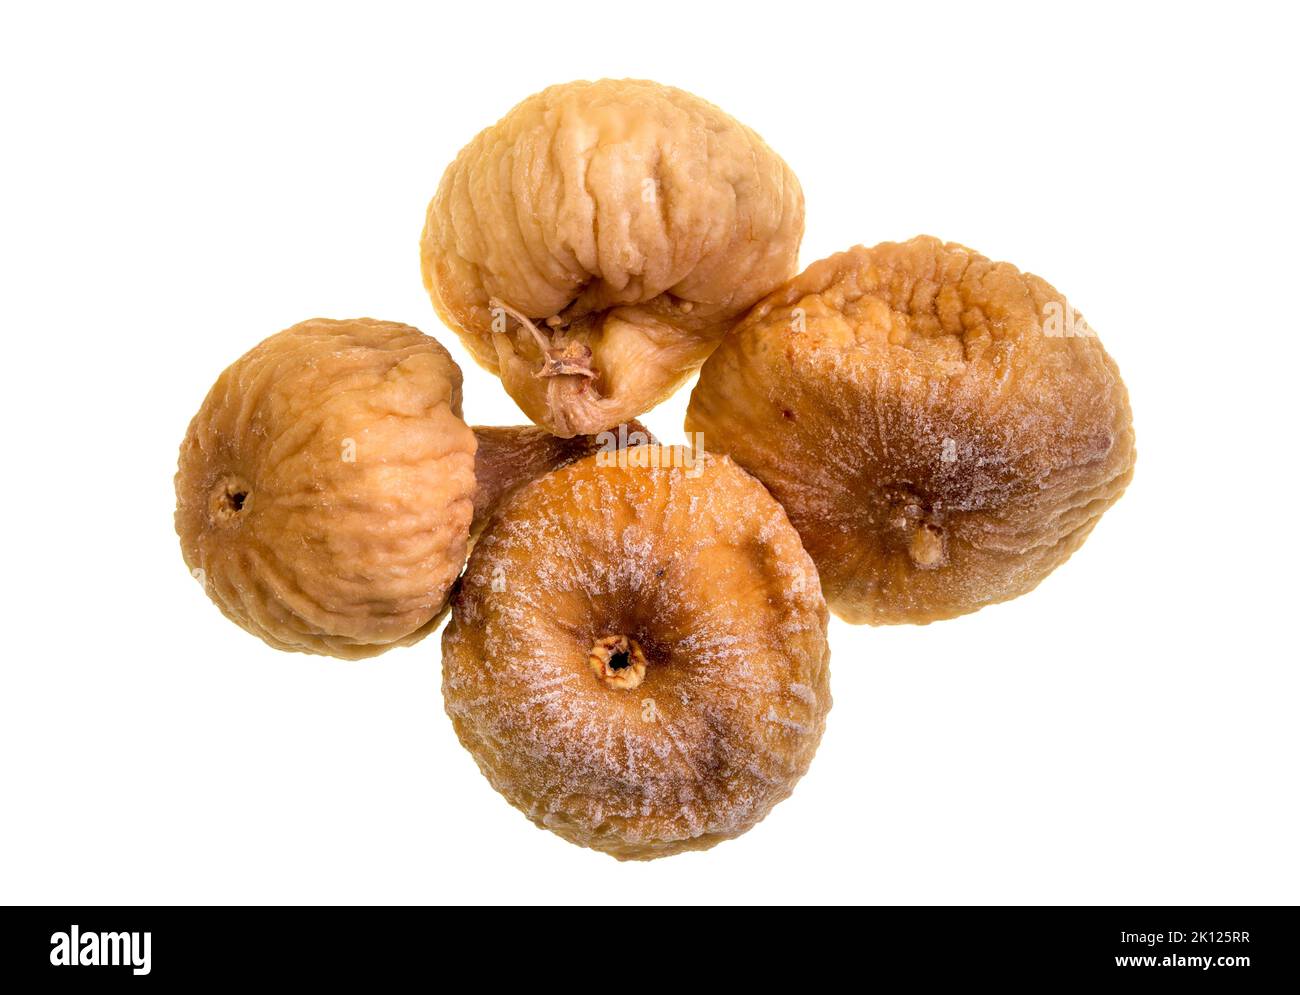 Delicious and healthy dried figs isolated on a white background Stock Photo